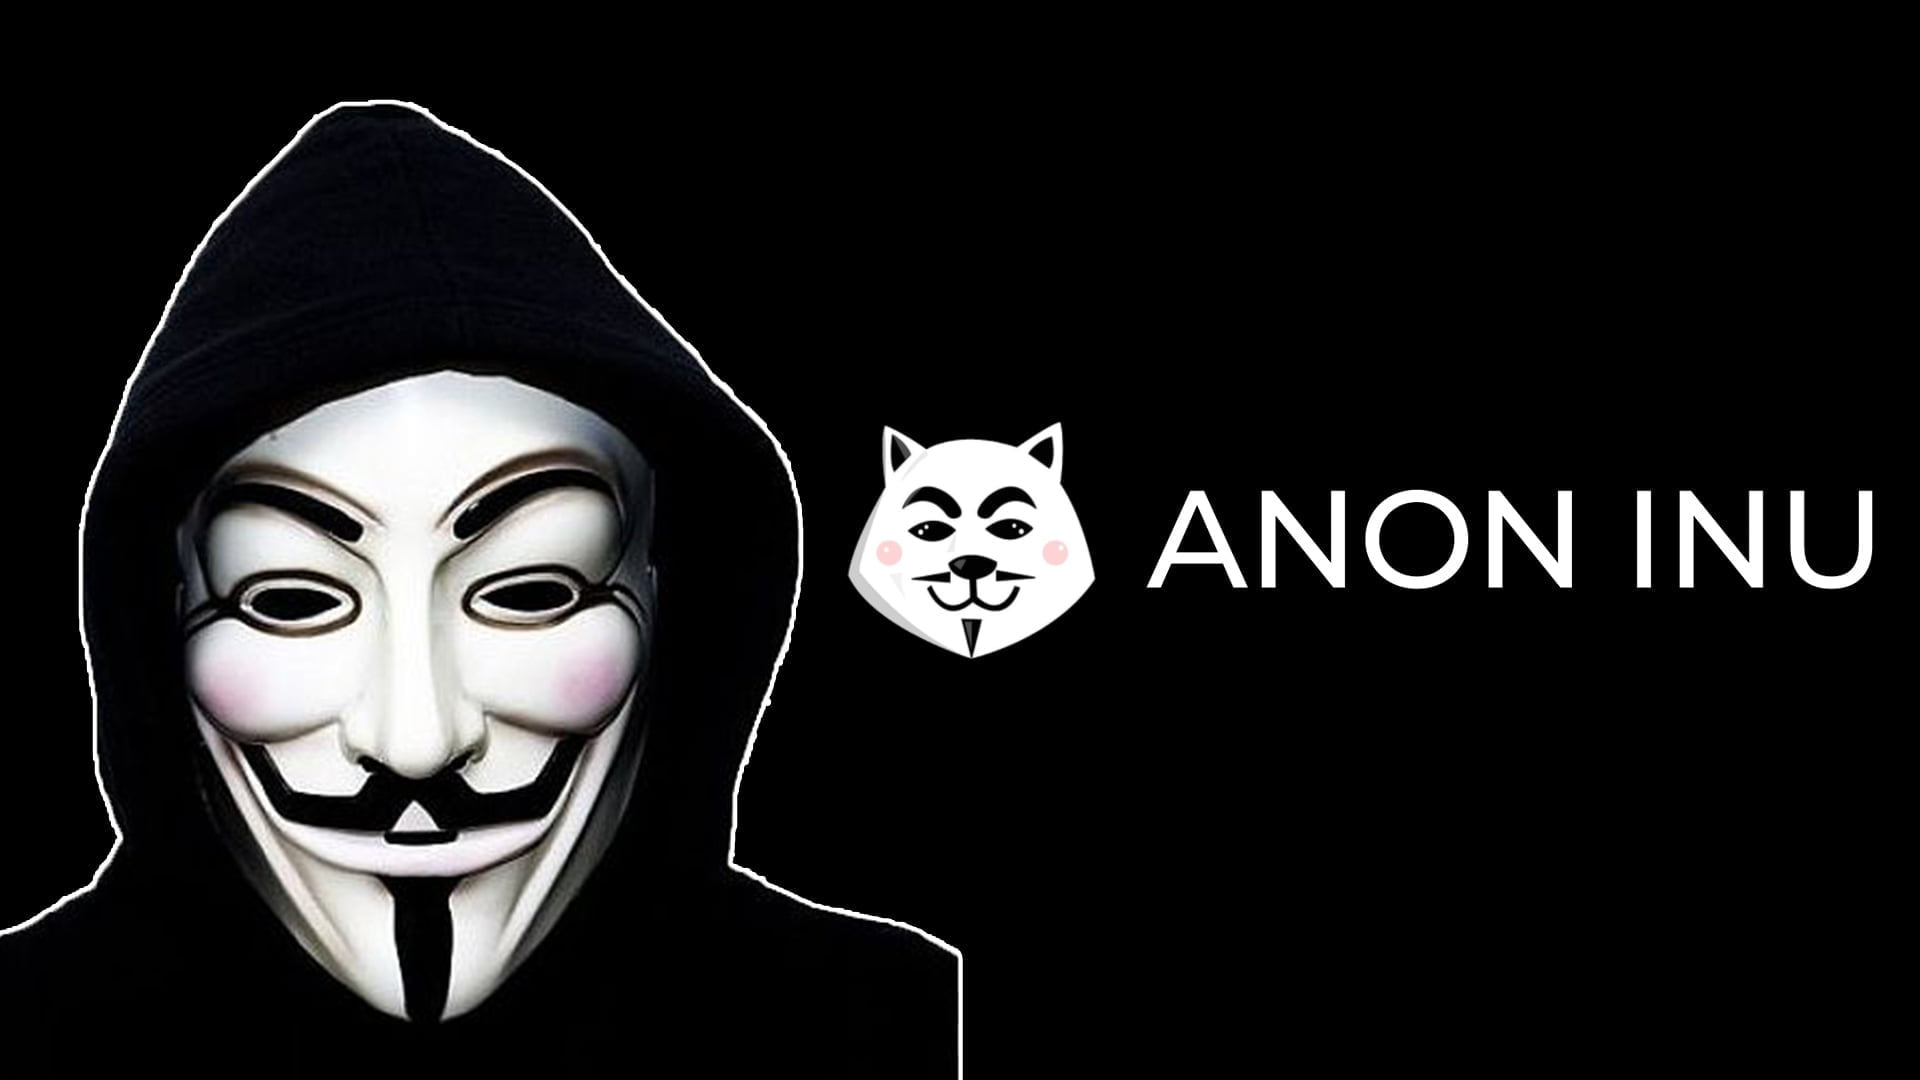 anonymous coin